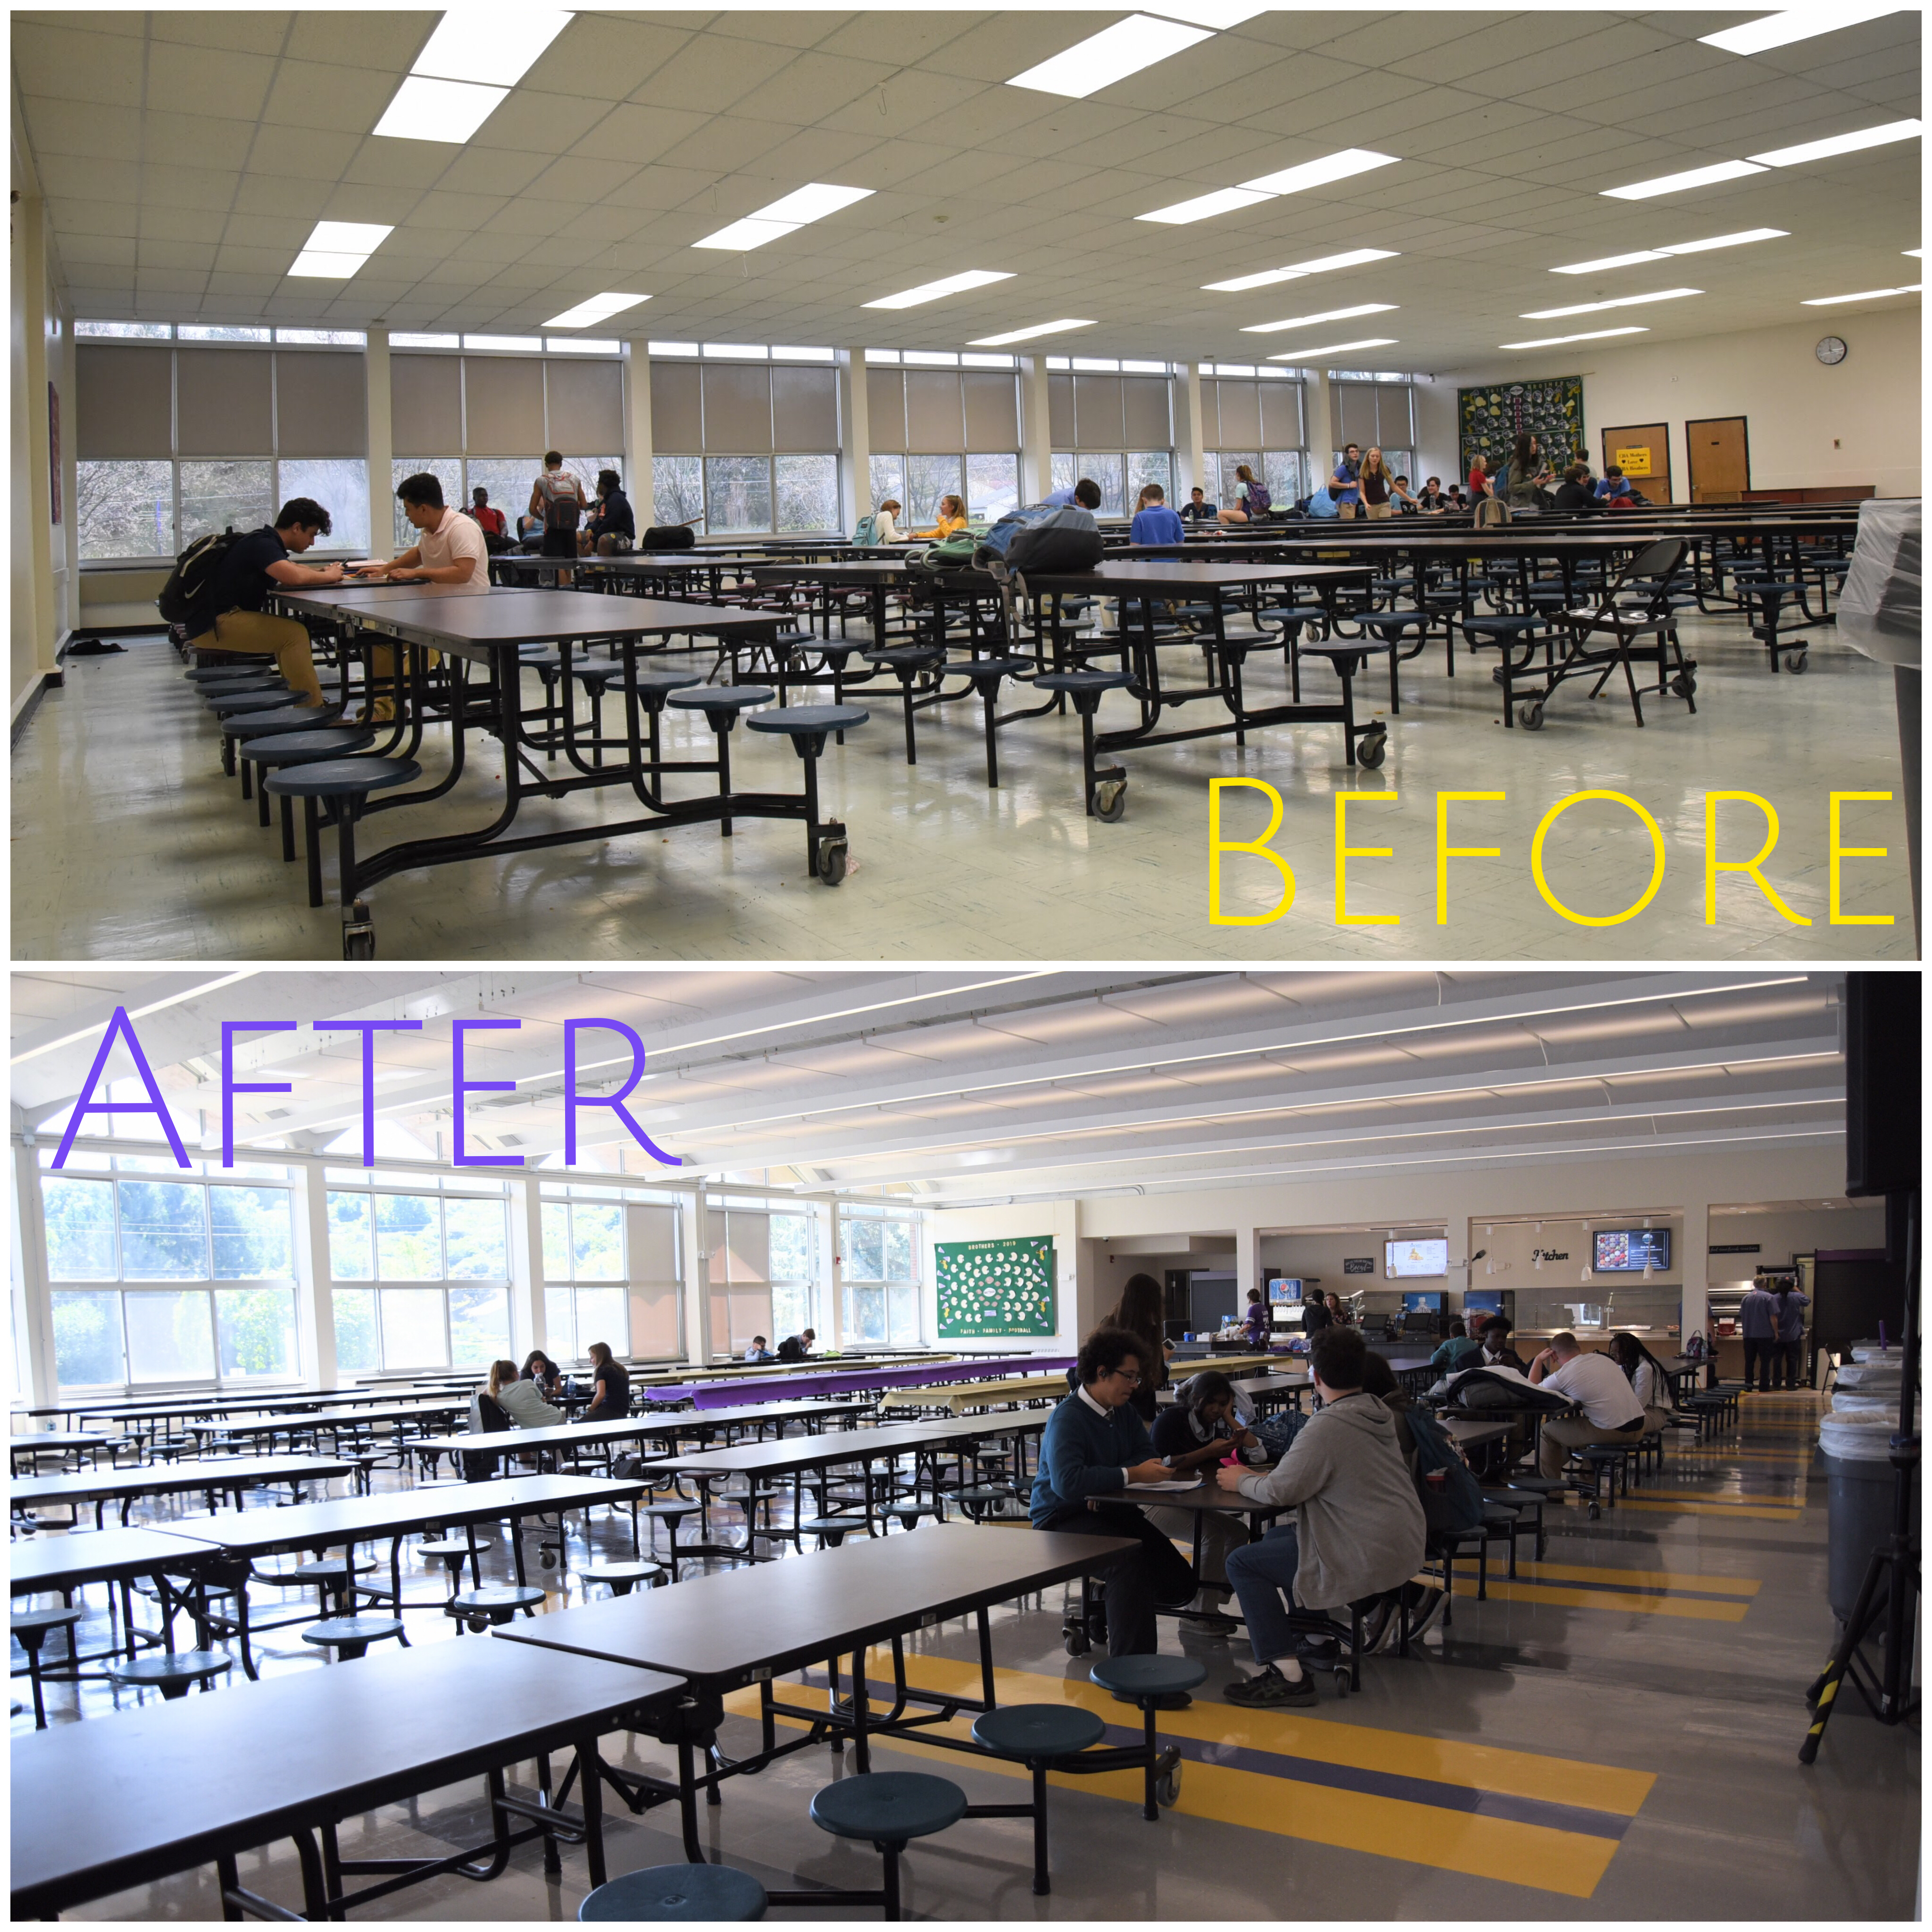 Dining Center before and after (from entrance)